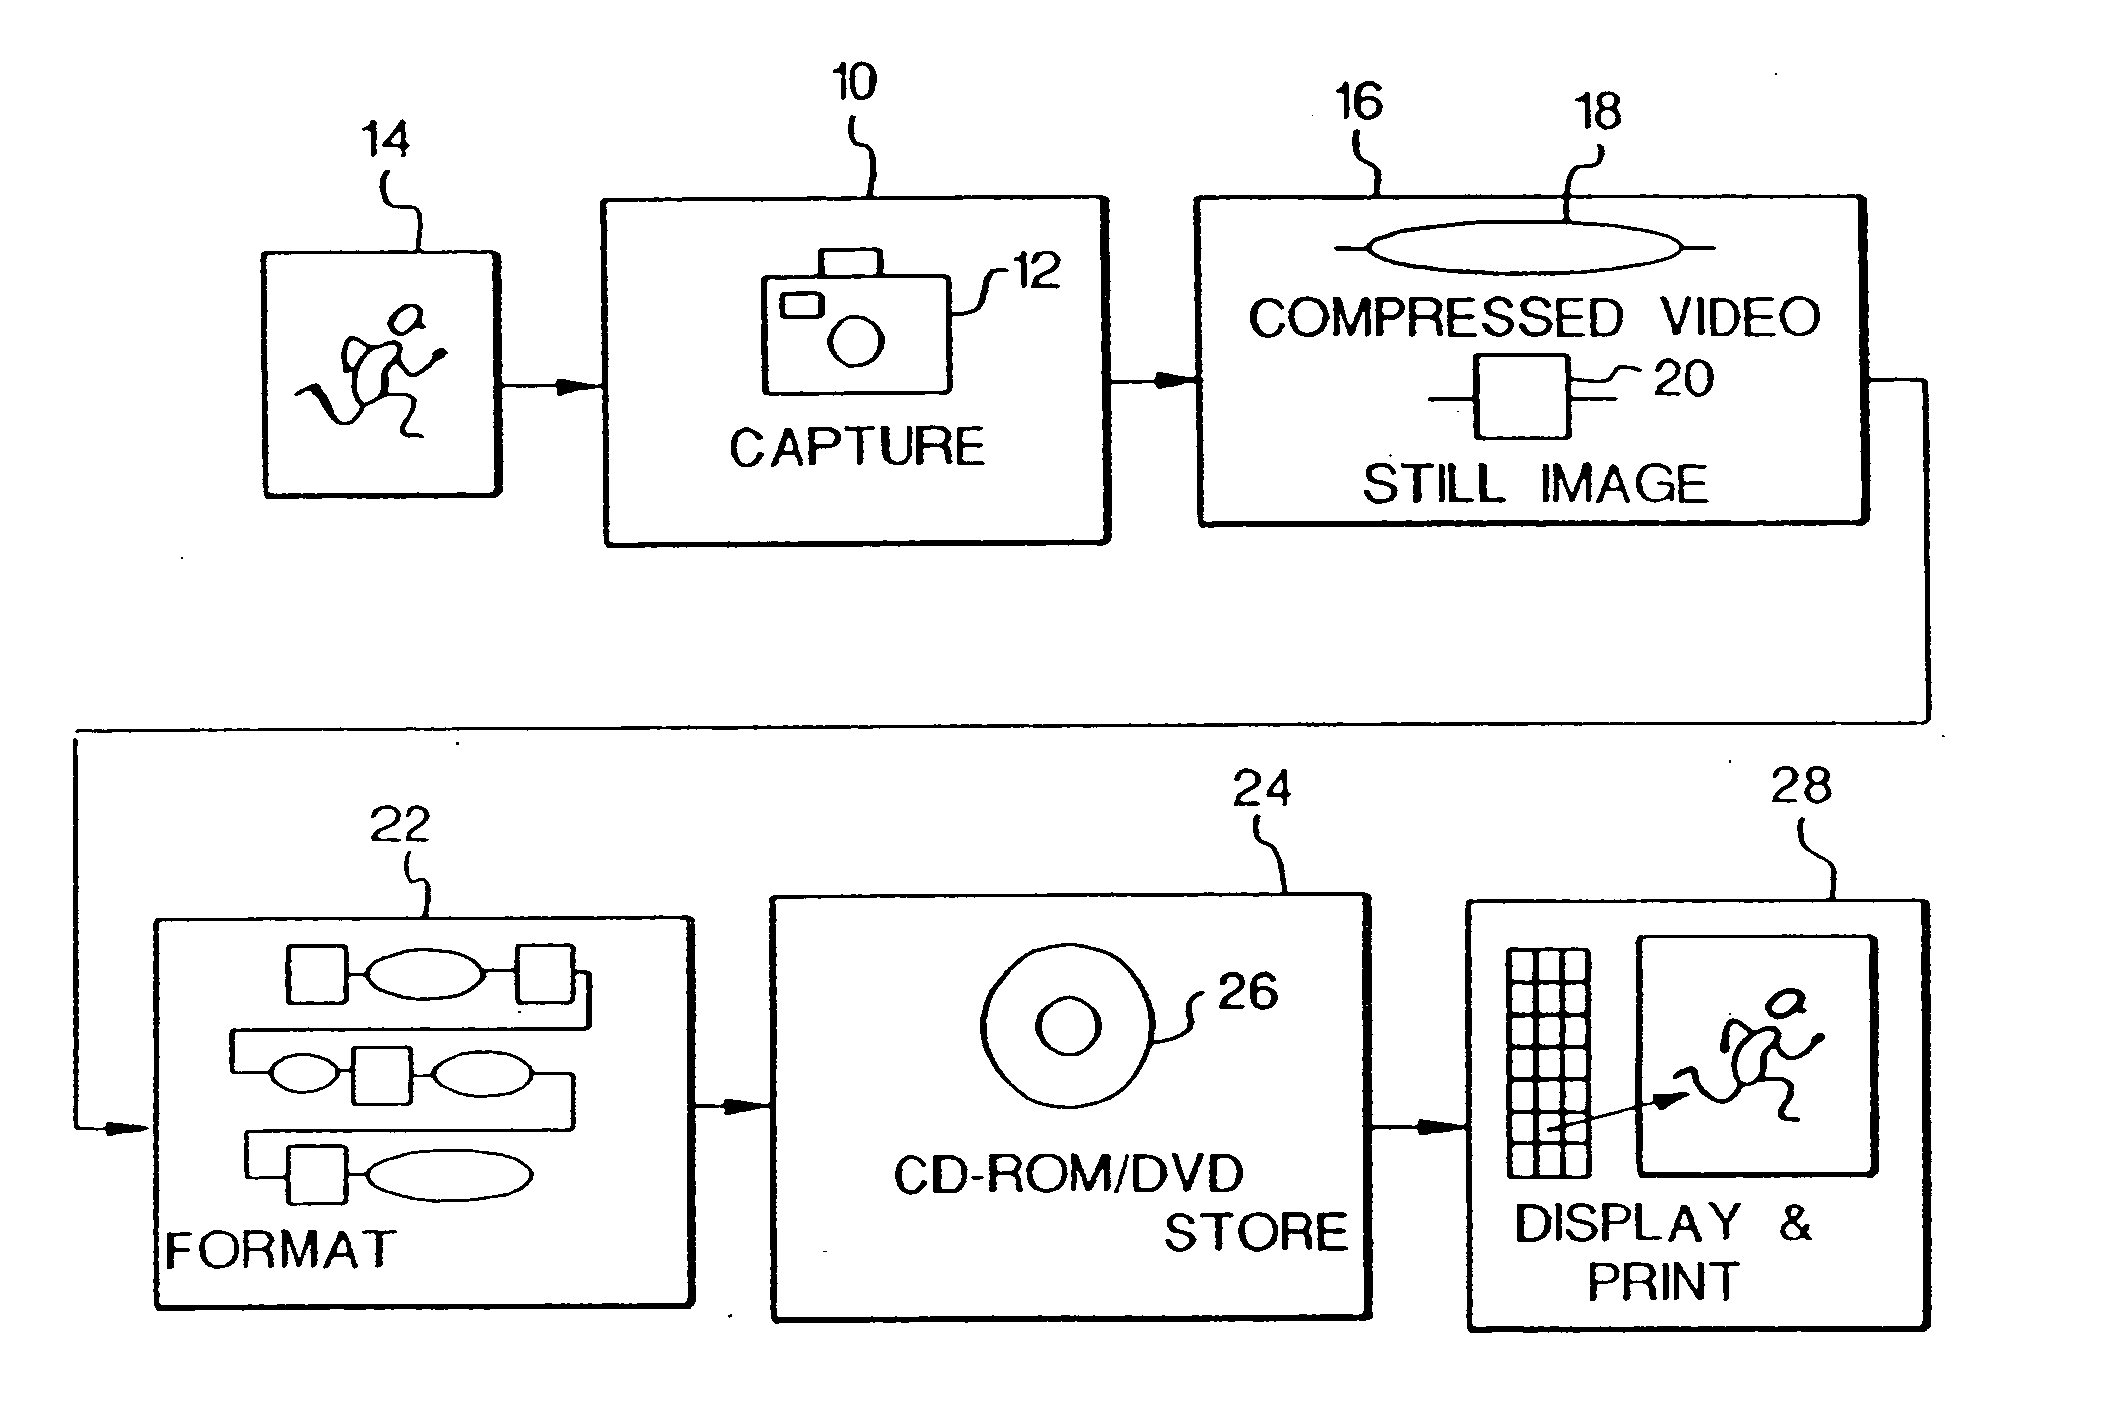 Method for simultaneously recording motion and still images in a digital camera